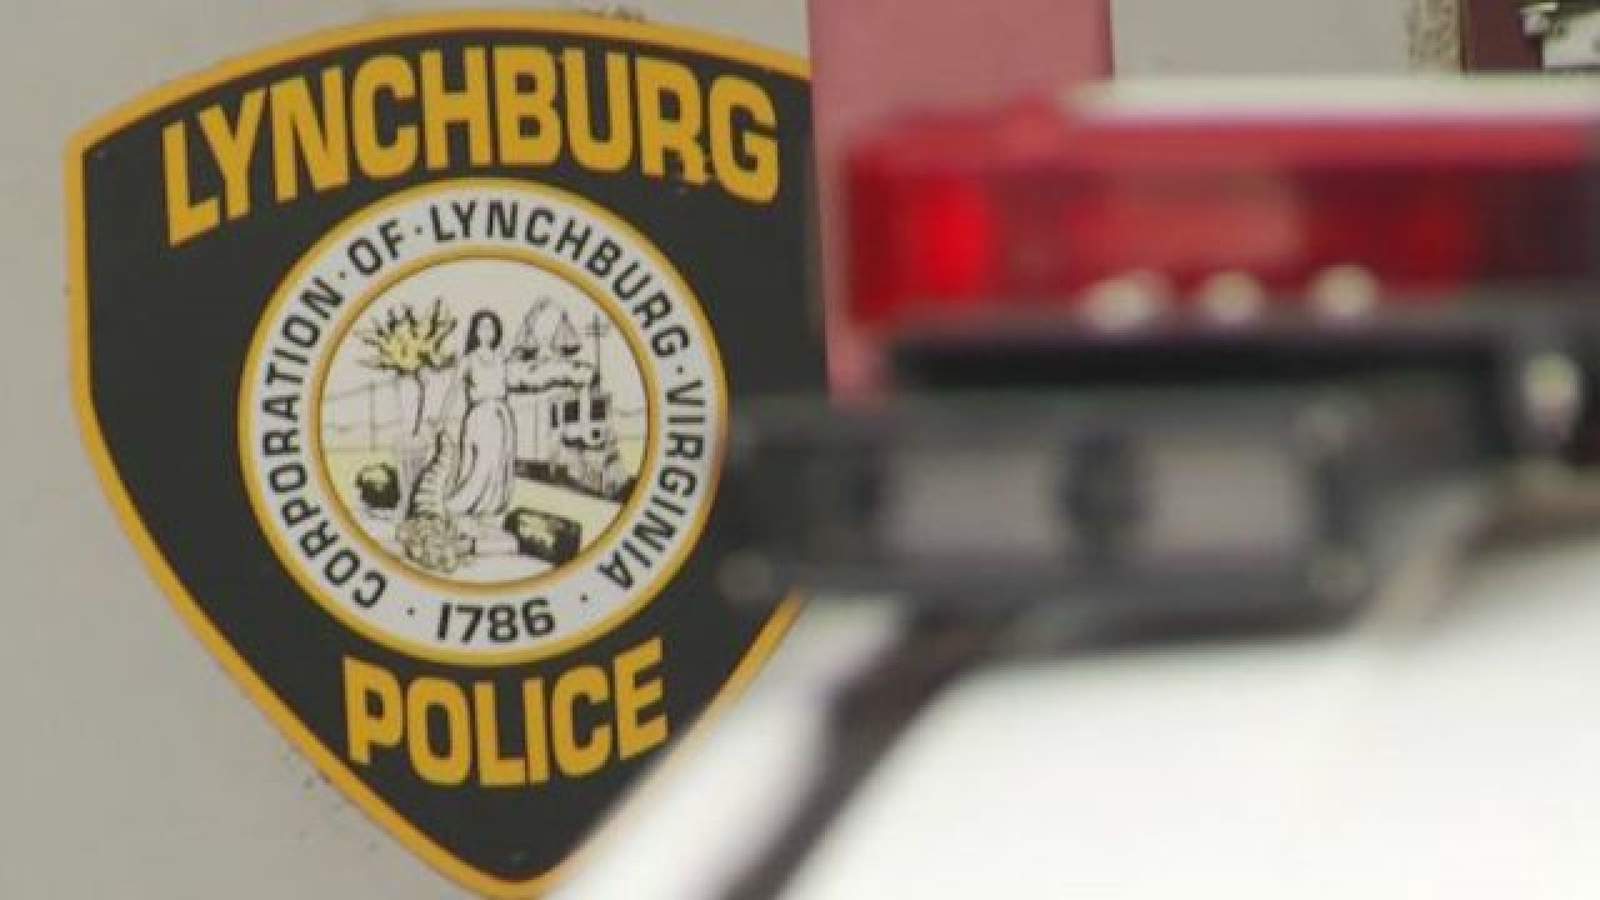 31-year-old Lynchburg man dies less than a week after apartment shooting